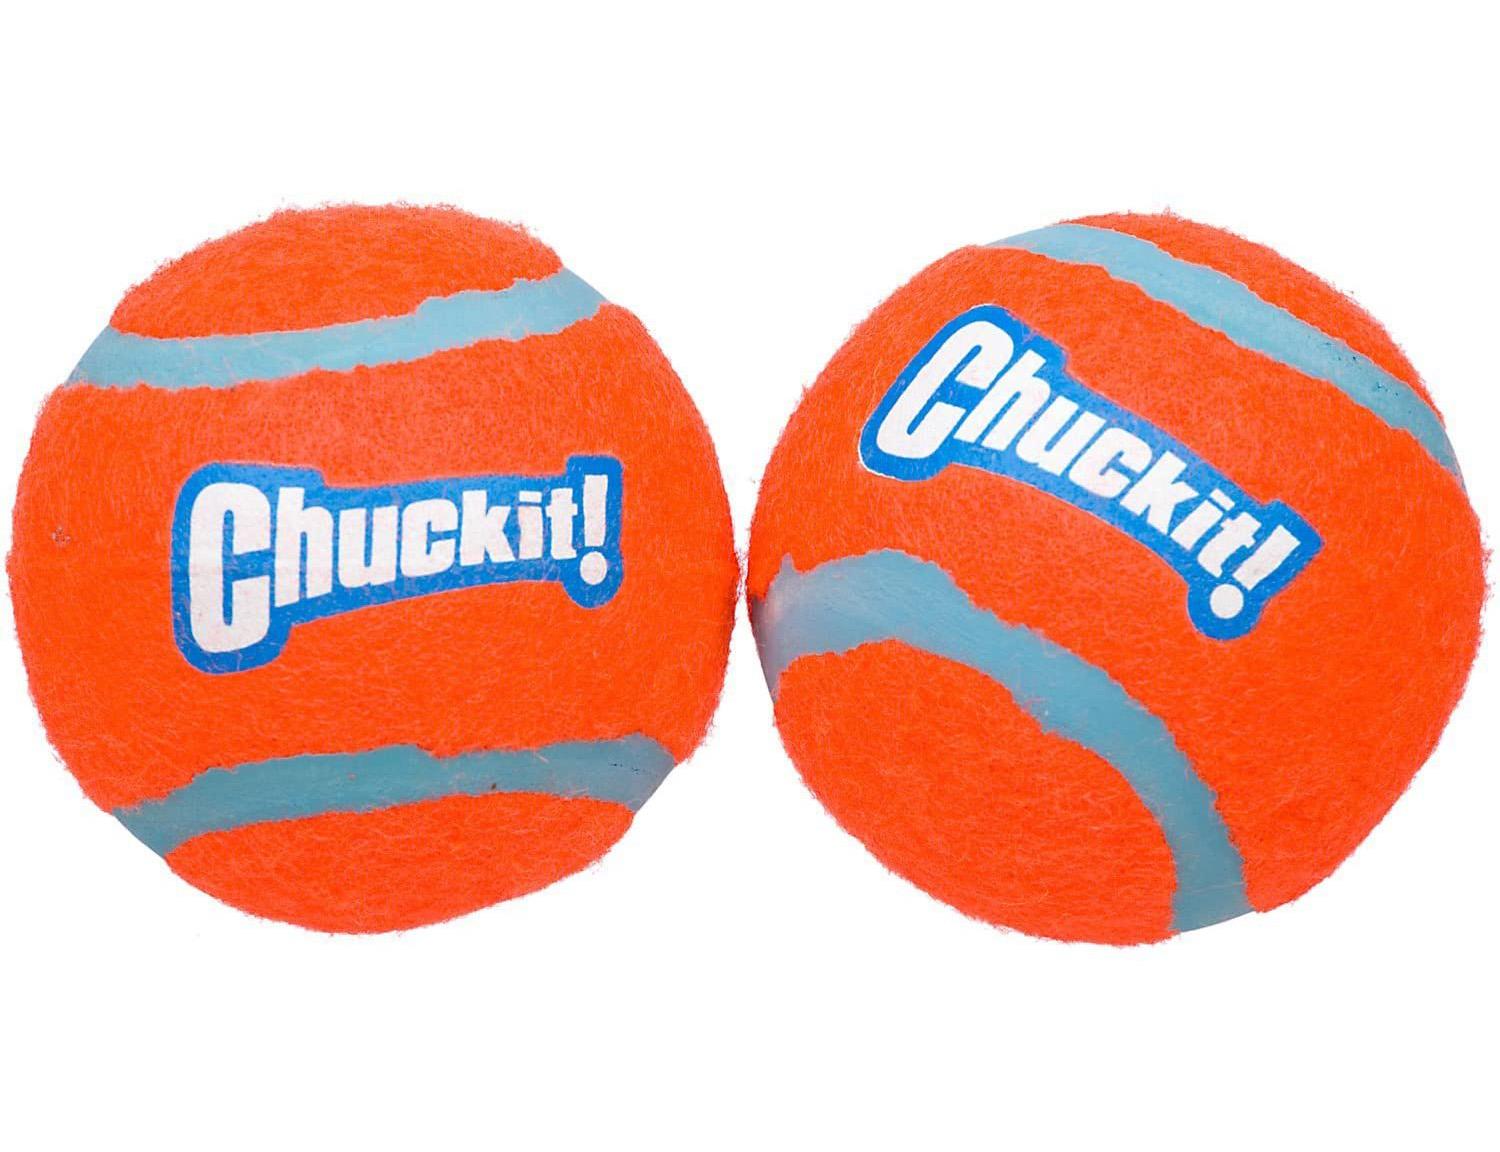 4 ChuckIt Small Tennis Ball Dog Toy for $2.10